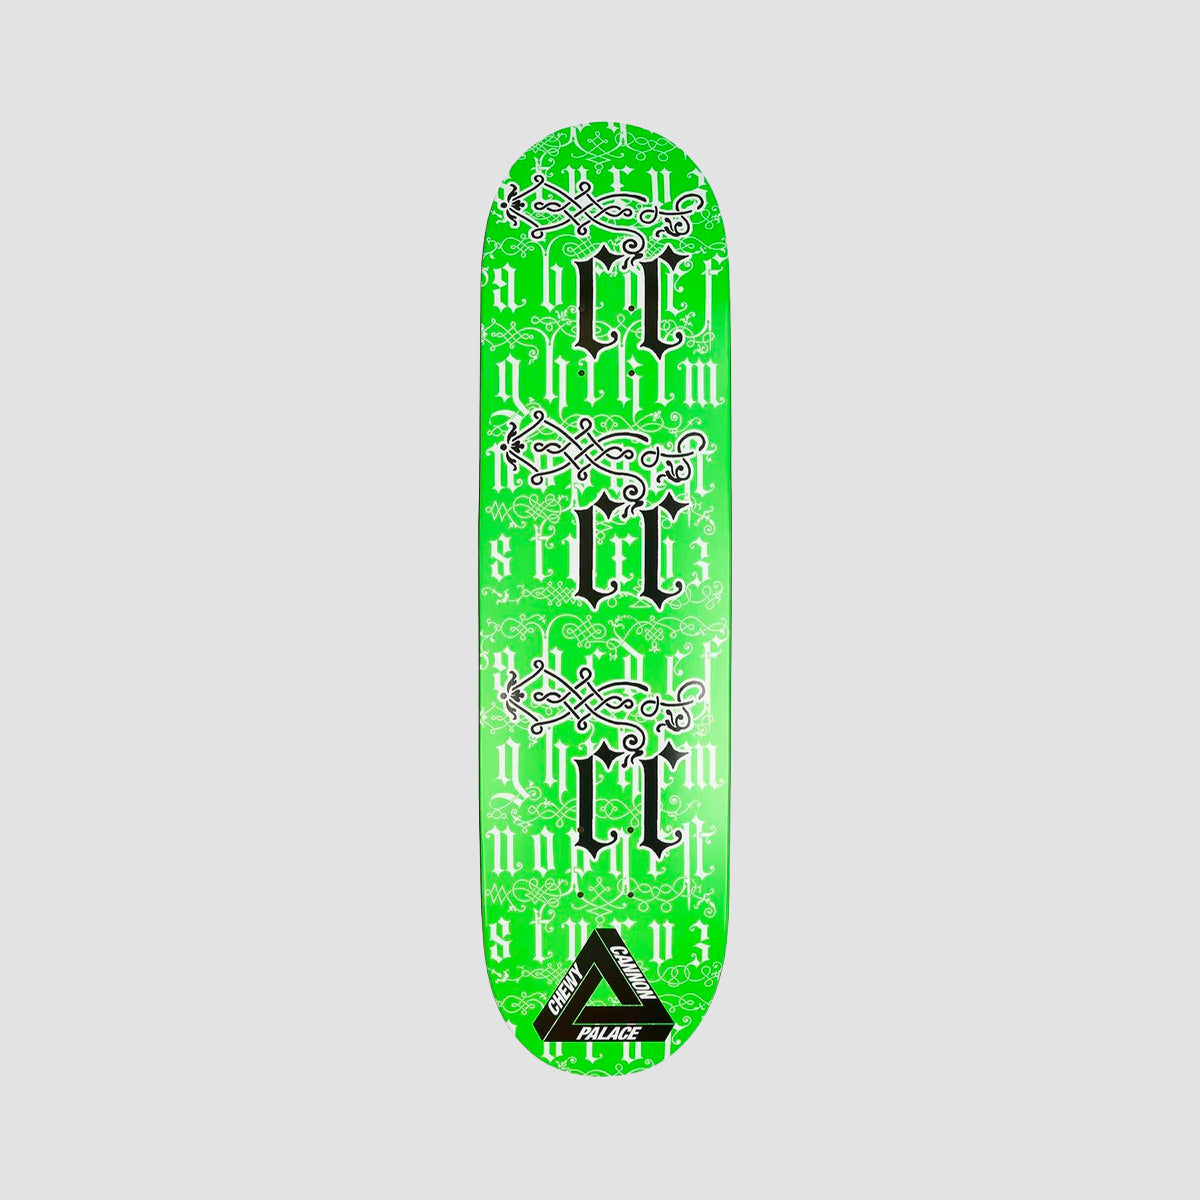 Palace Chewy Cannon Pro S33 Skateboard Deck - 8.375"